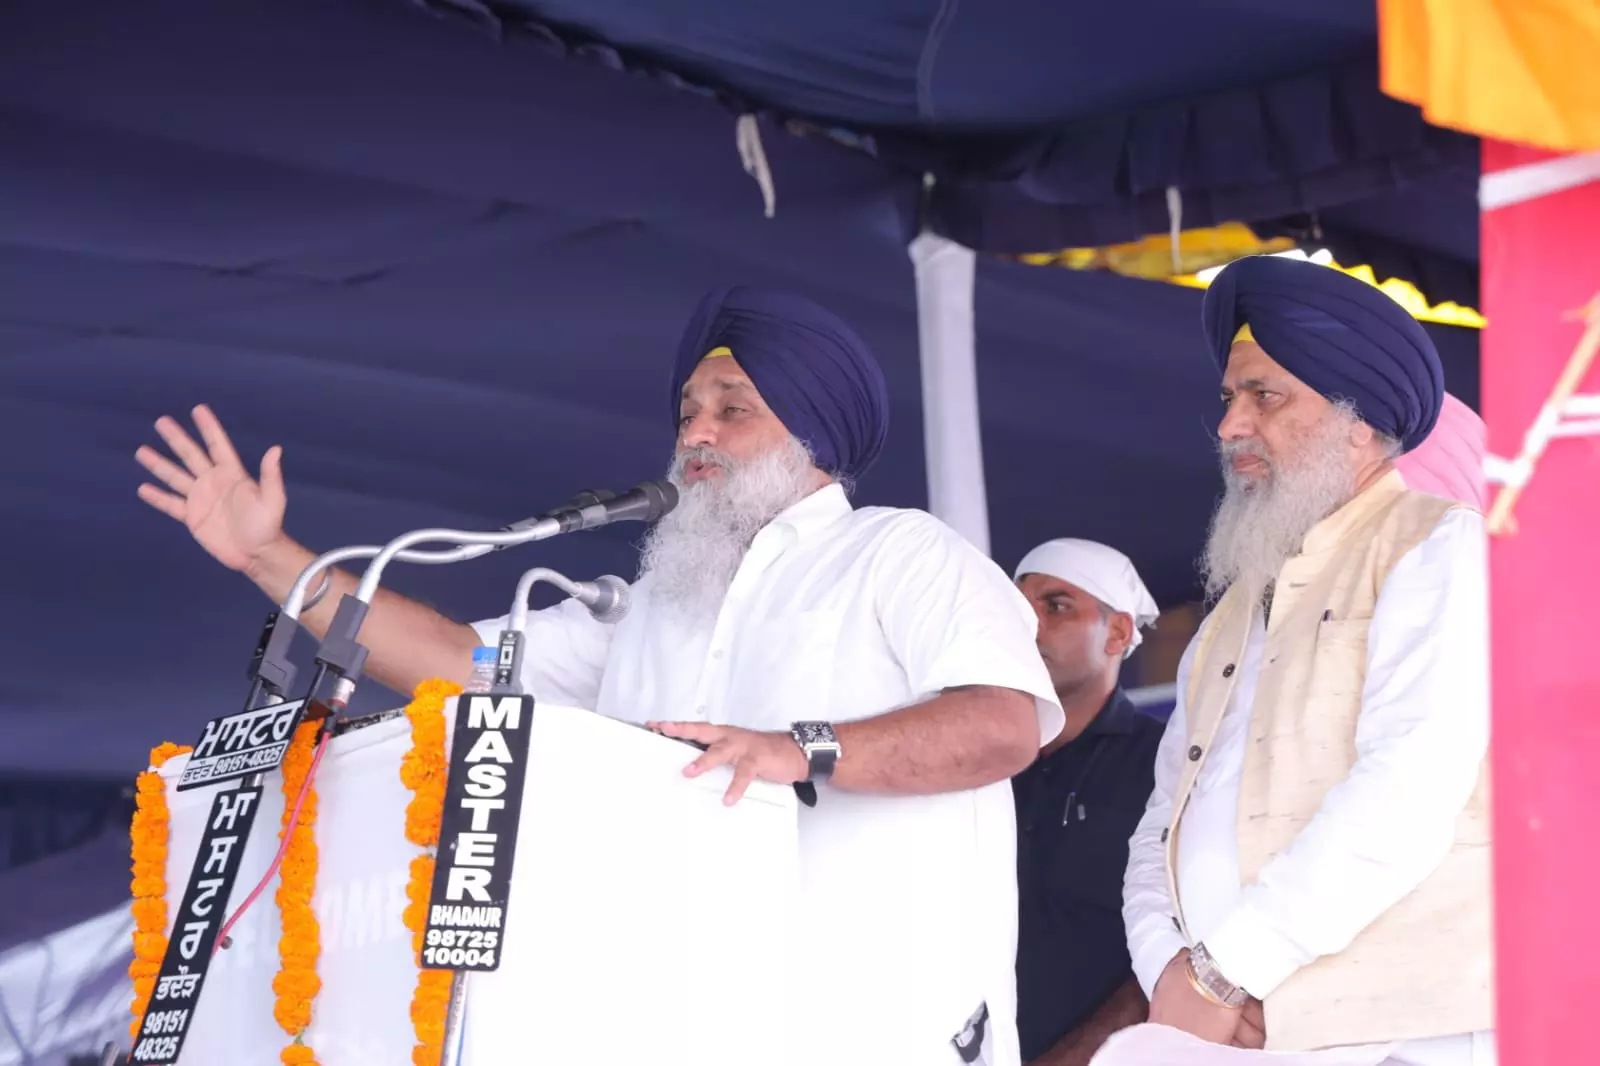 Will Akali Dal join INDIA alliance? Badals many options remark fuels speculations